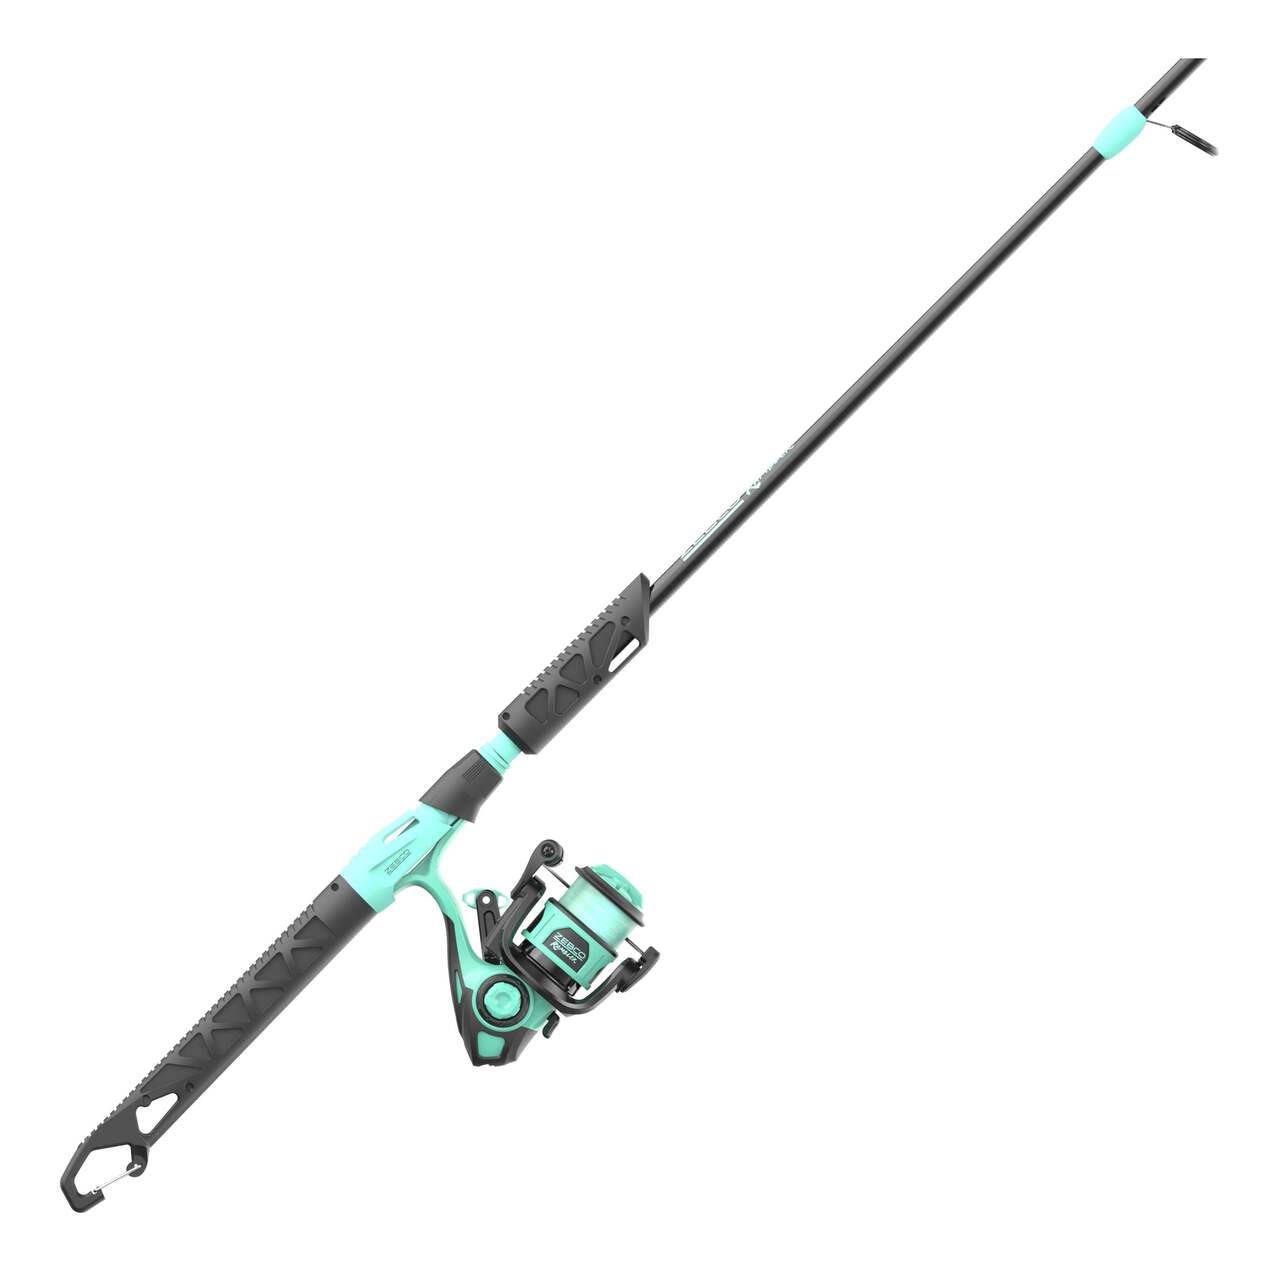 Cheap High Quality Kids Fishing Rod 1.6m Carbon with Fiber Glass